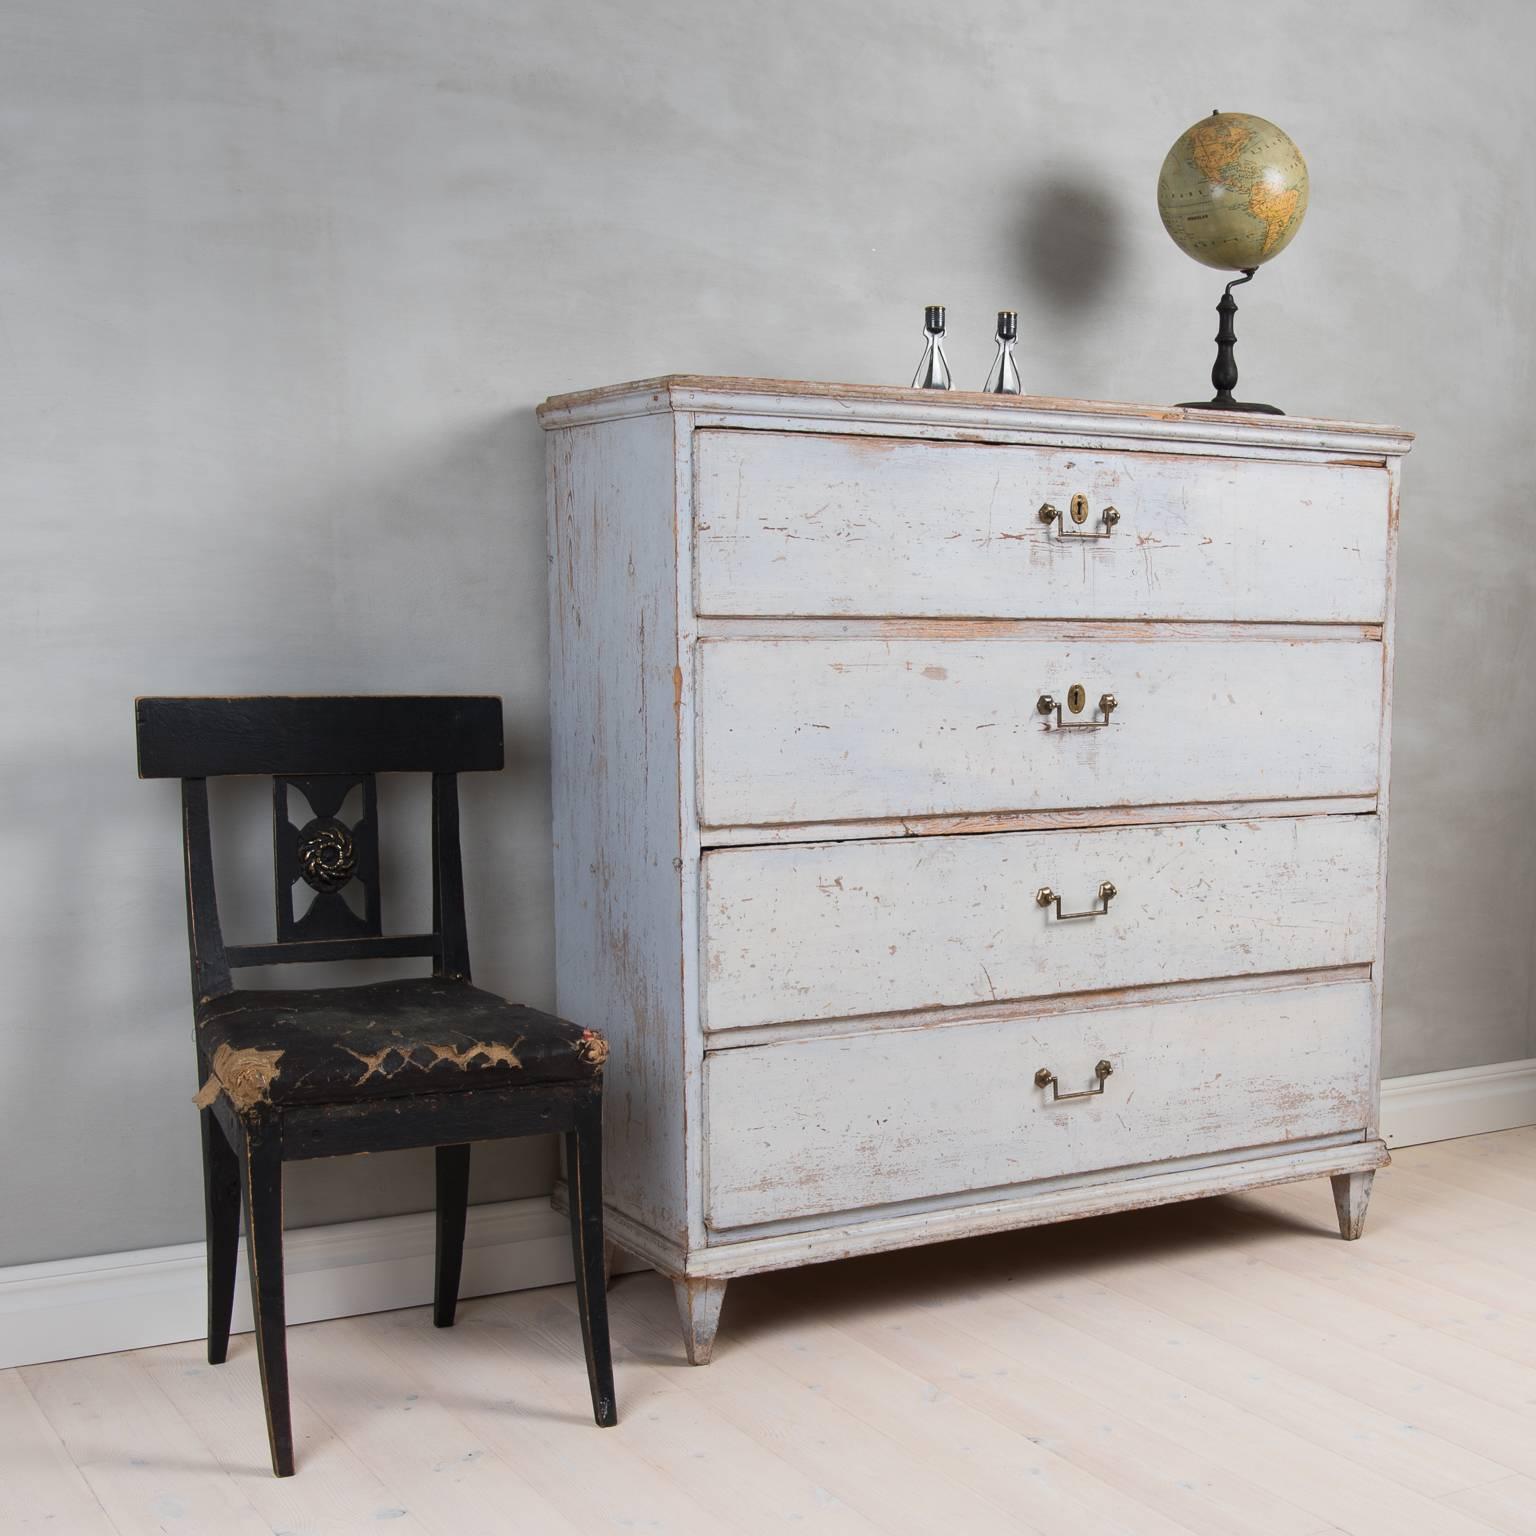 Pine Swedish Provincial Gustavian Bureau from the Early 1800s with Original Paint